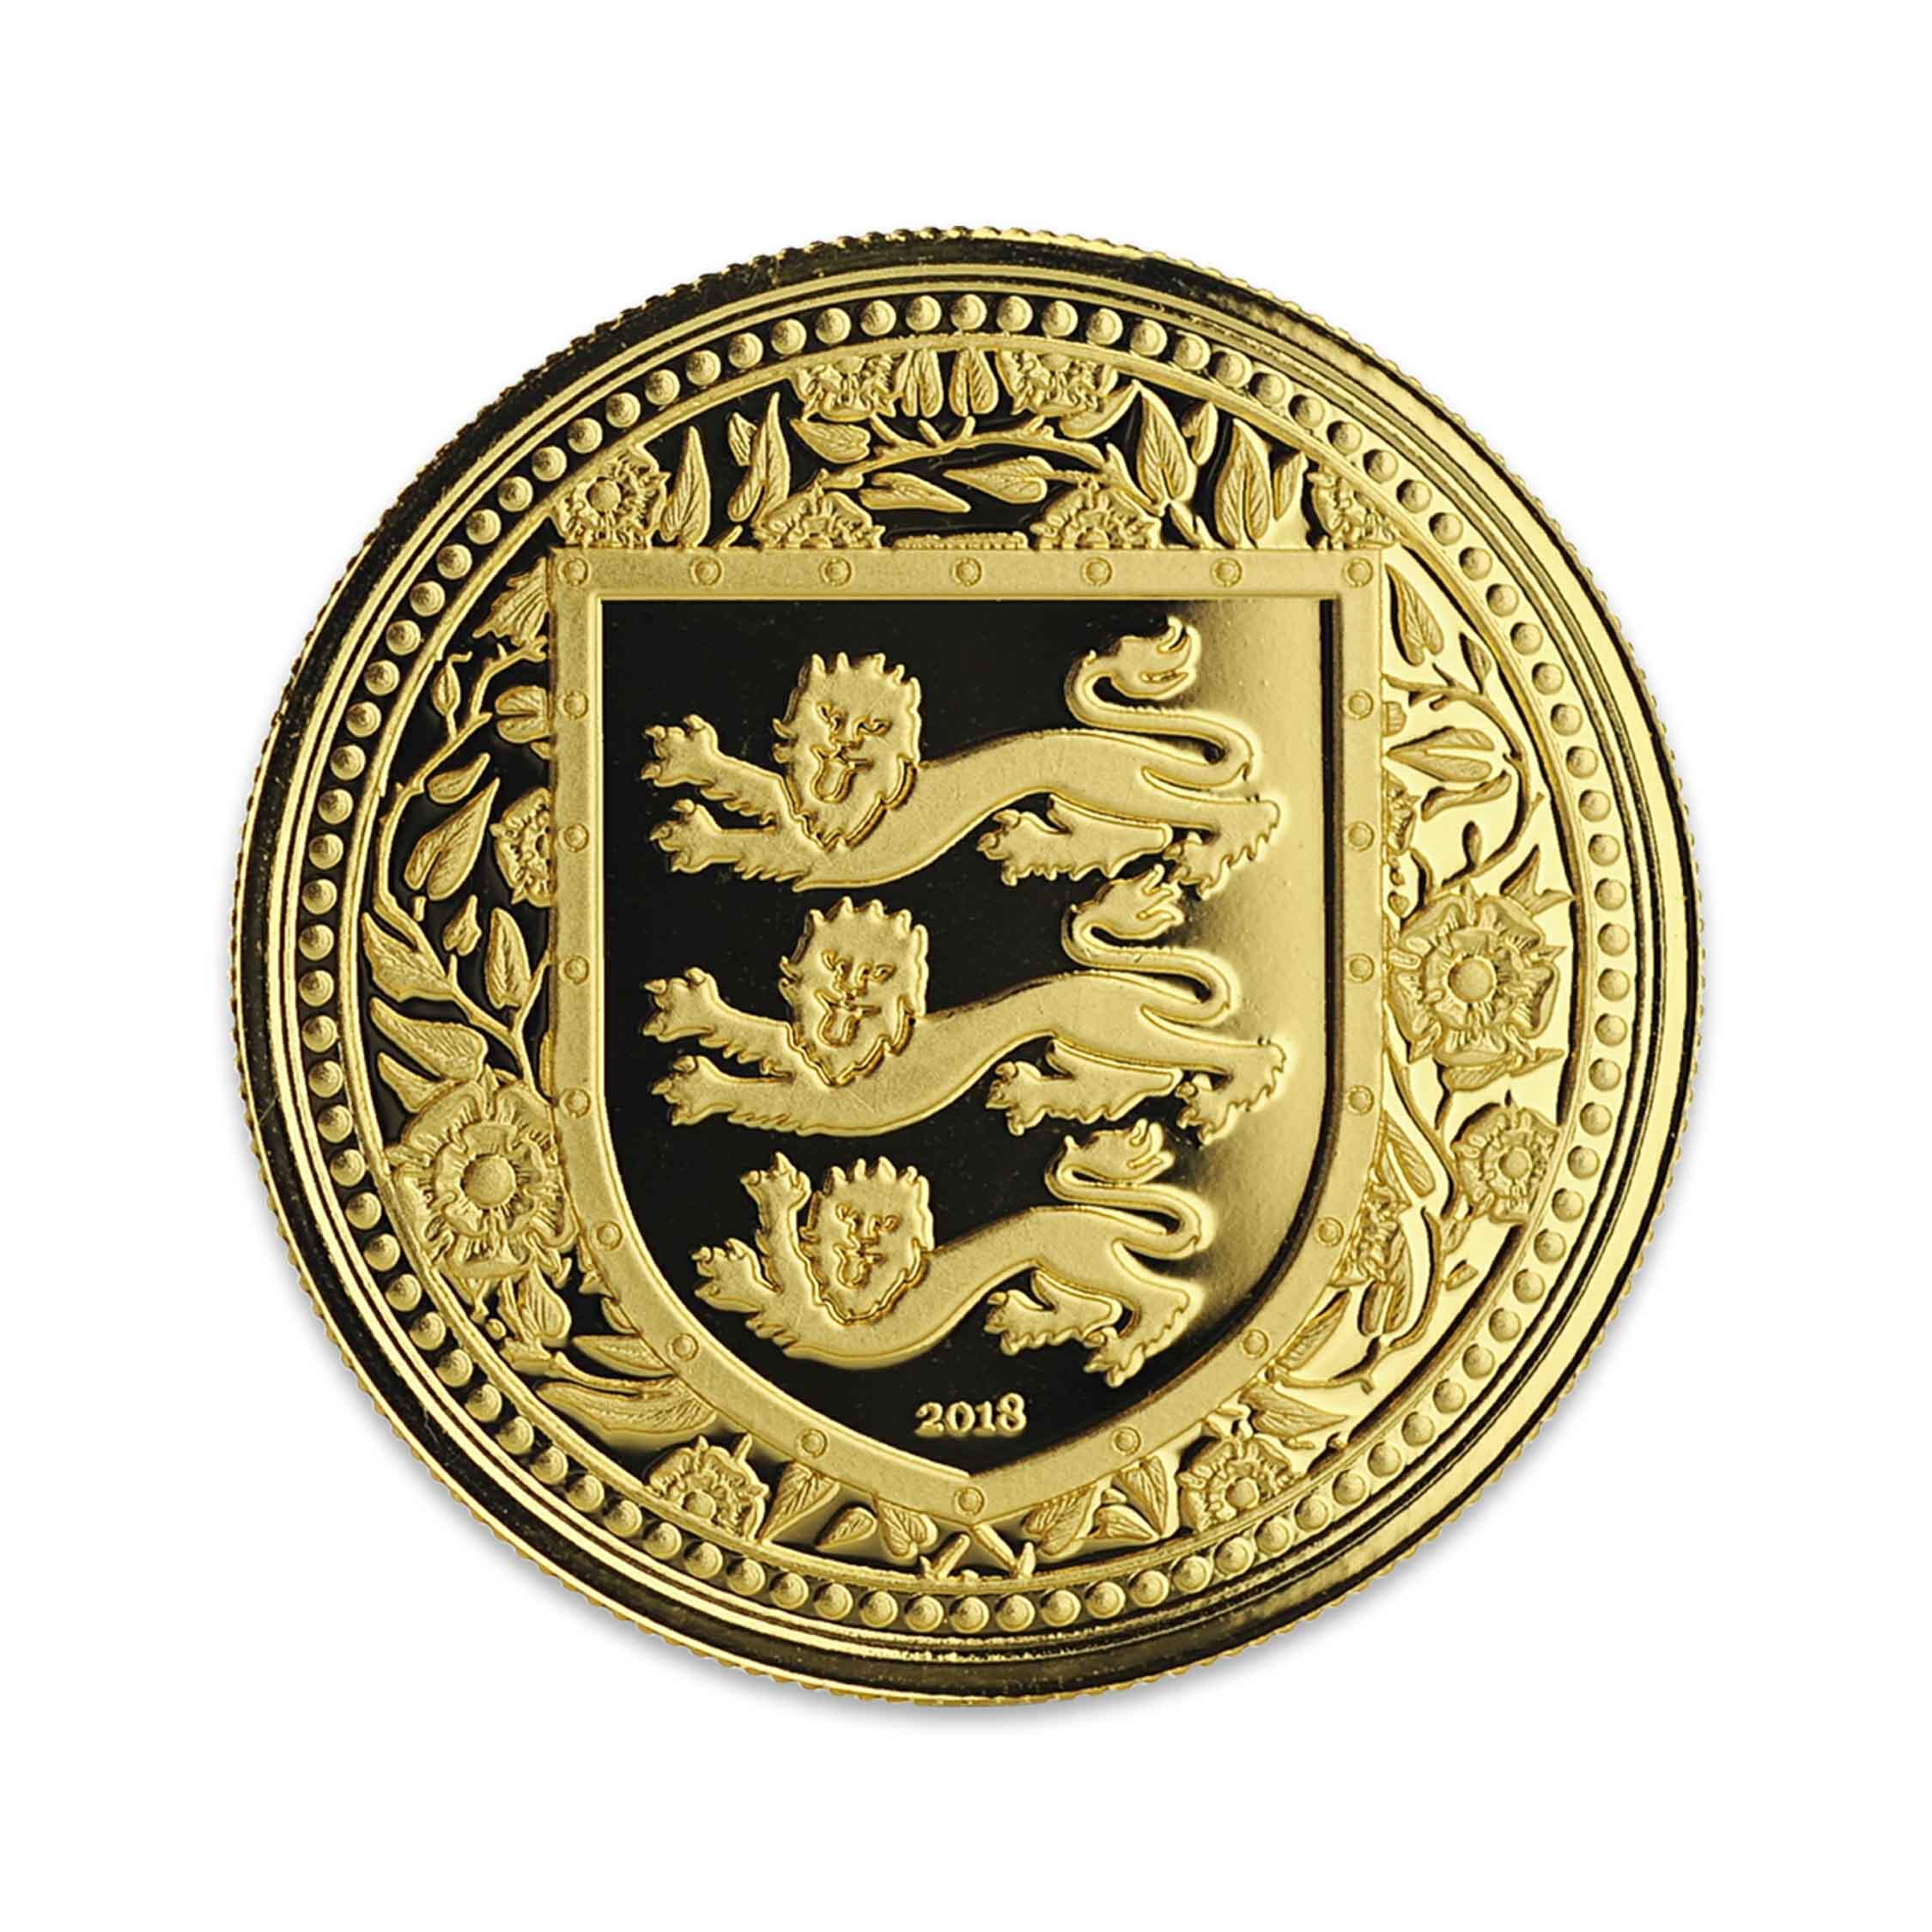 18 Royal Arms Of England 1 Oz Gold Coin Scottsdale Mint